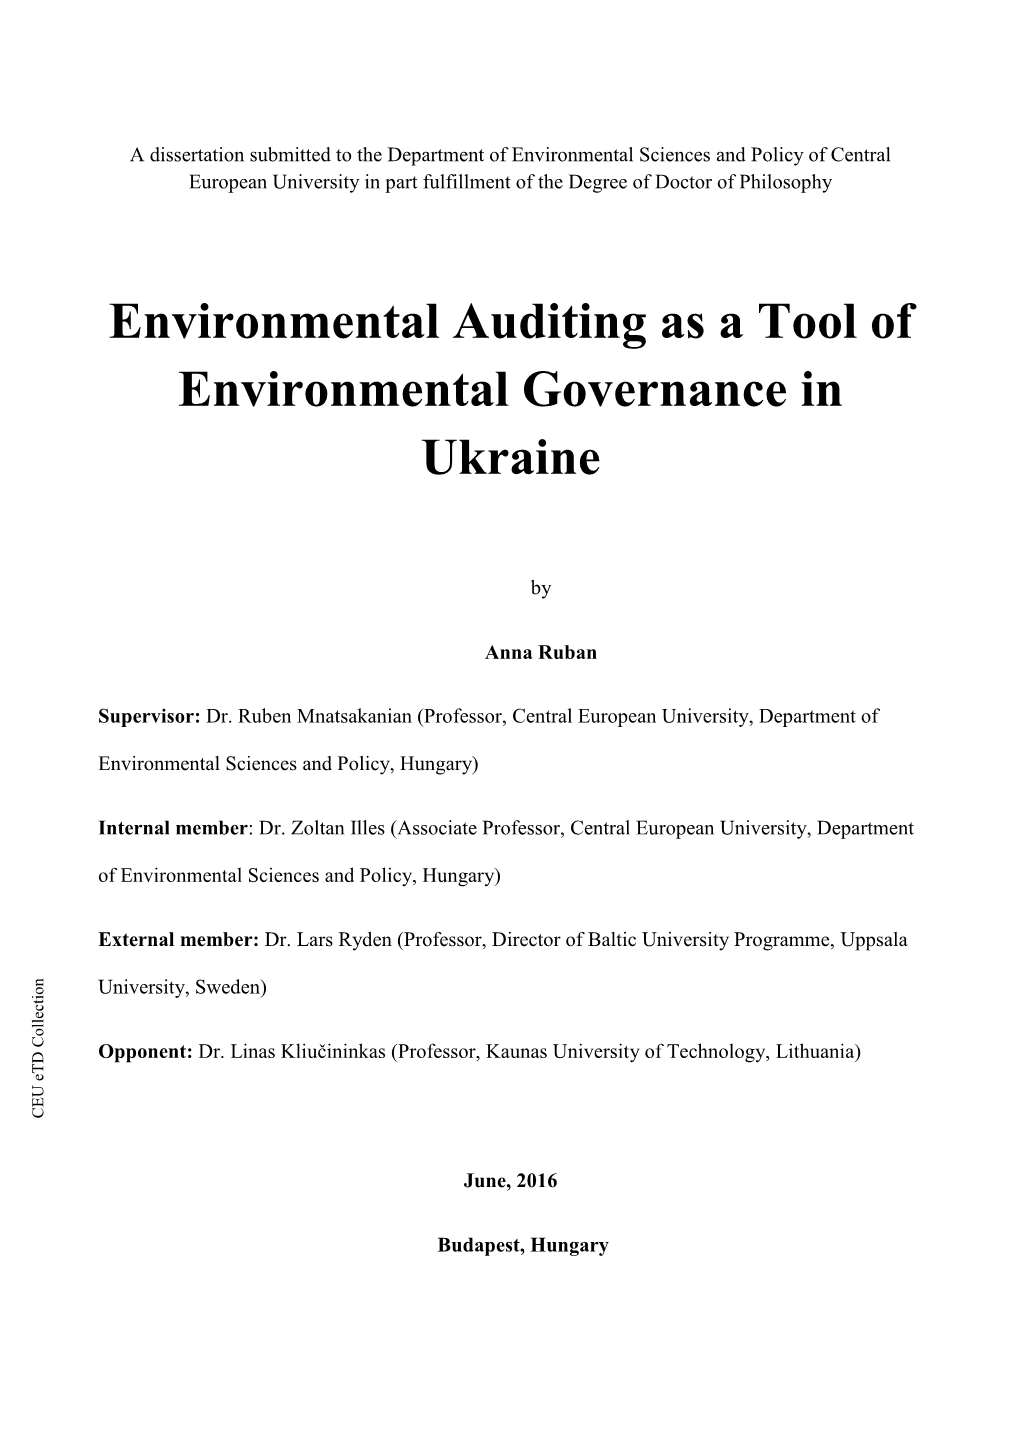 Environmental Auditing As a Tool of Environmental Governance in Ukraine